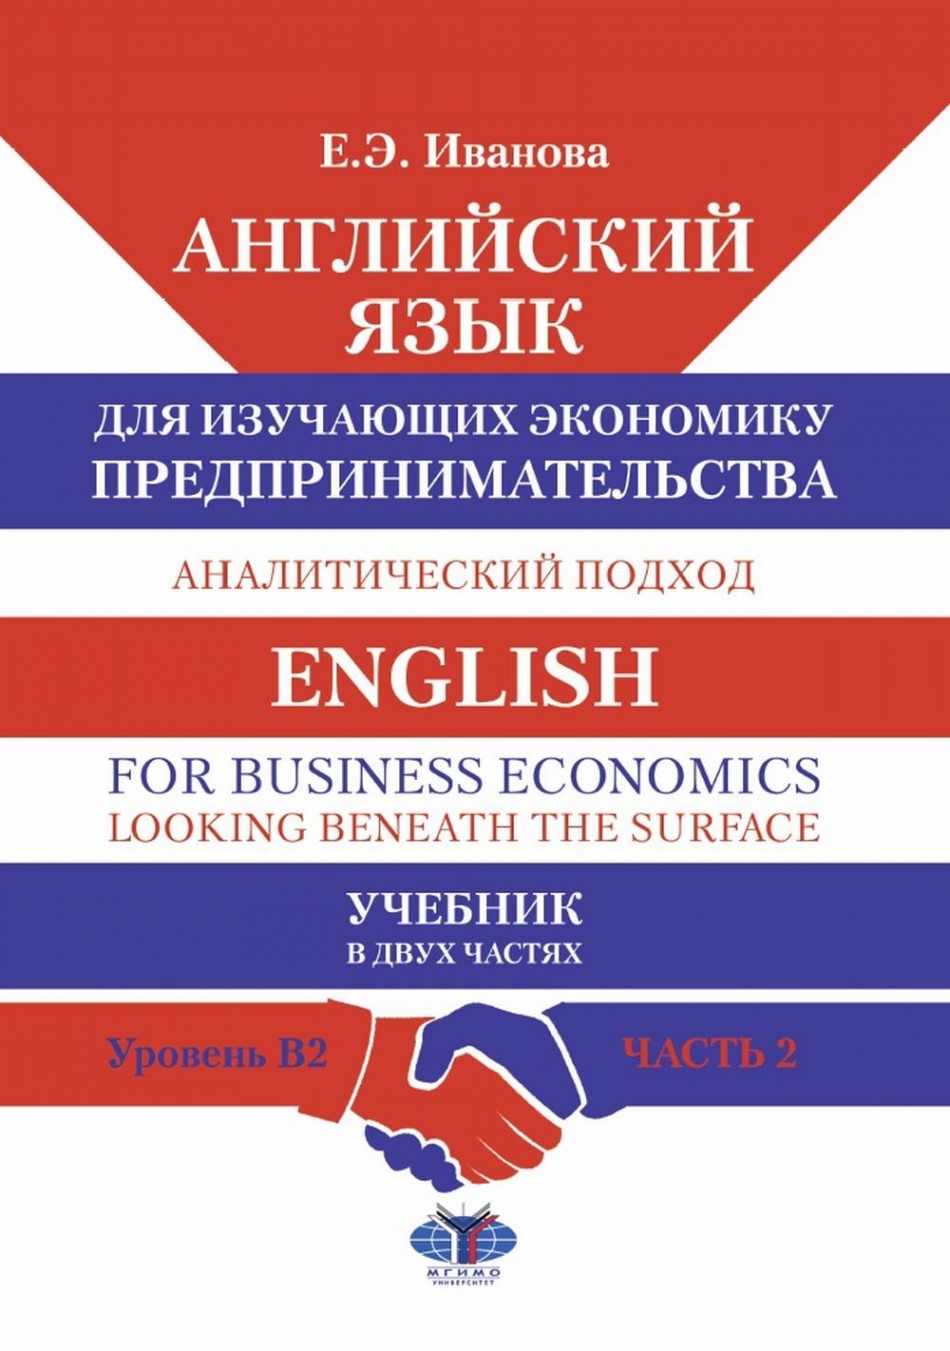  ..      .  . English for Business Economics. Looking Beneath the Surface. .   .  B2.  2 